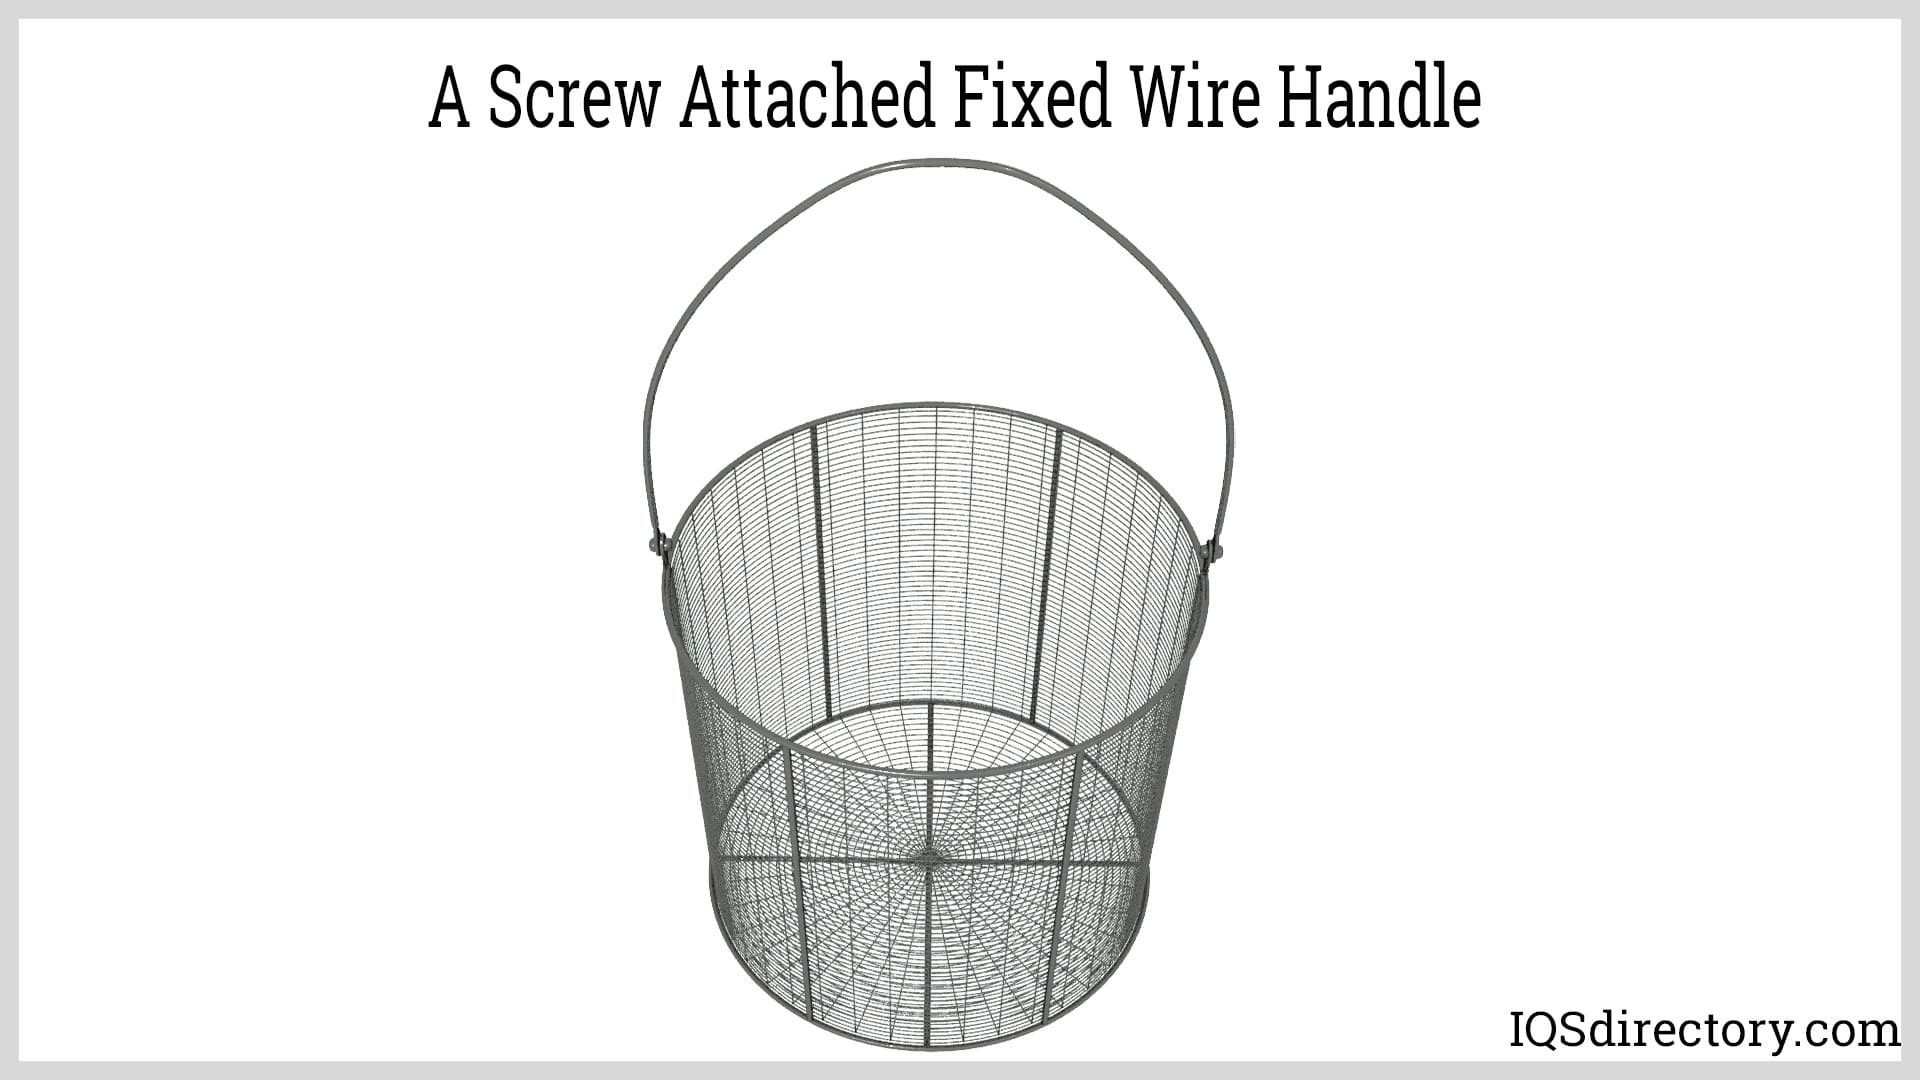 A Screw Attached Fixed Wire Handle